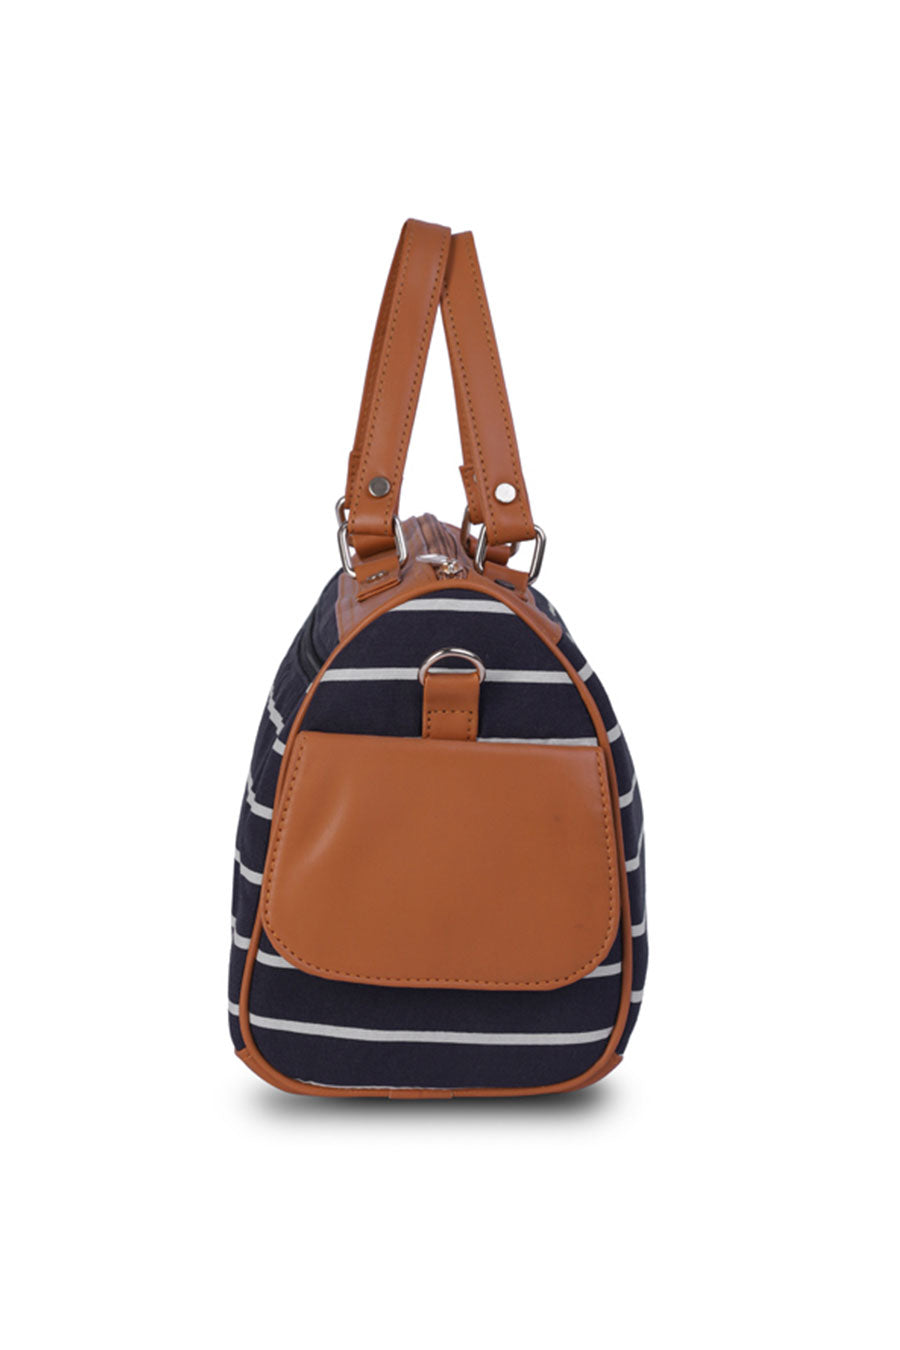 Black Striped Mini Duffle with Side Pockets